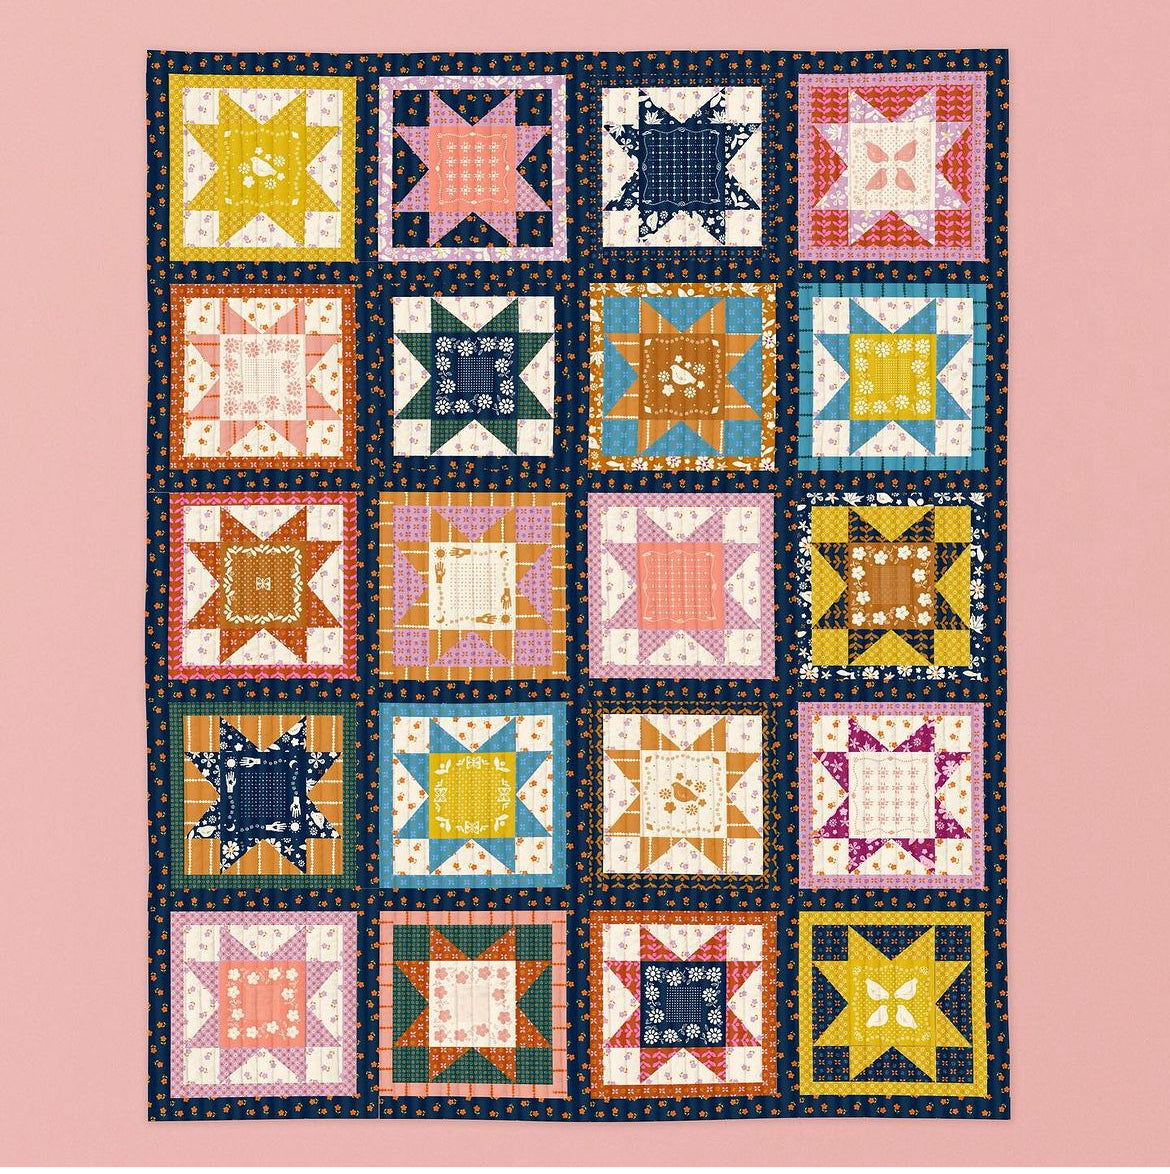 The Maple Star - Ruby Star Society Quilt Kit Bundle - Pattern Included | Pear Tree Market